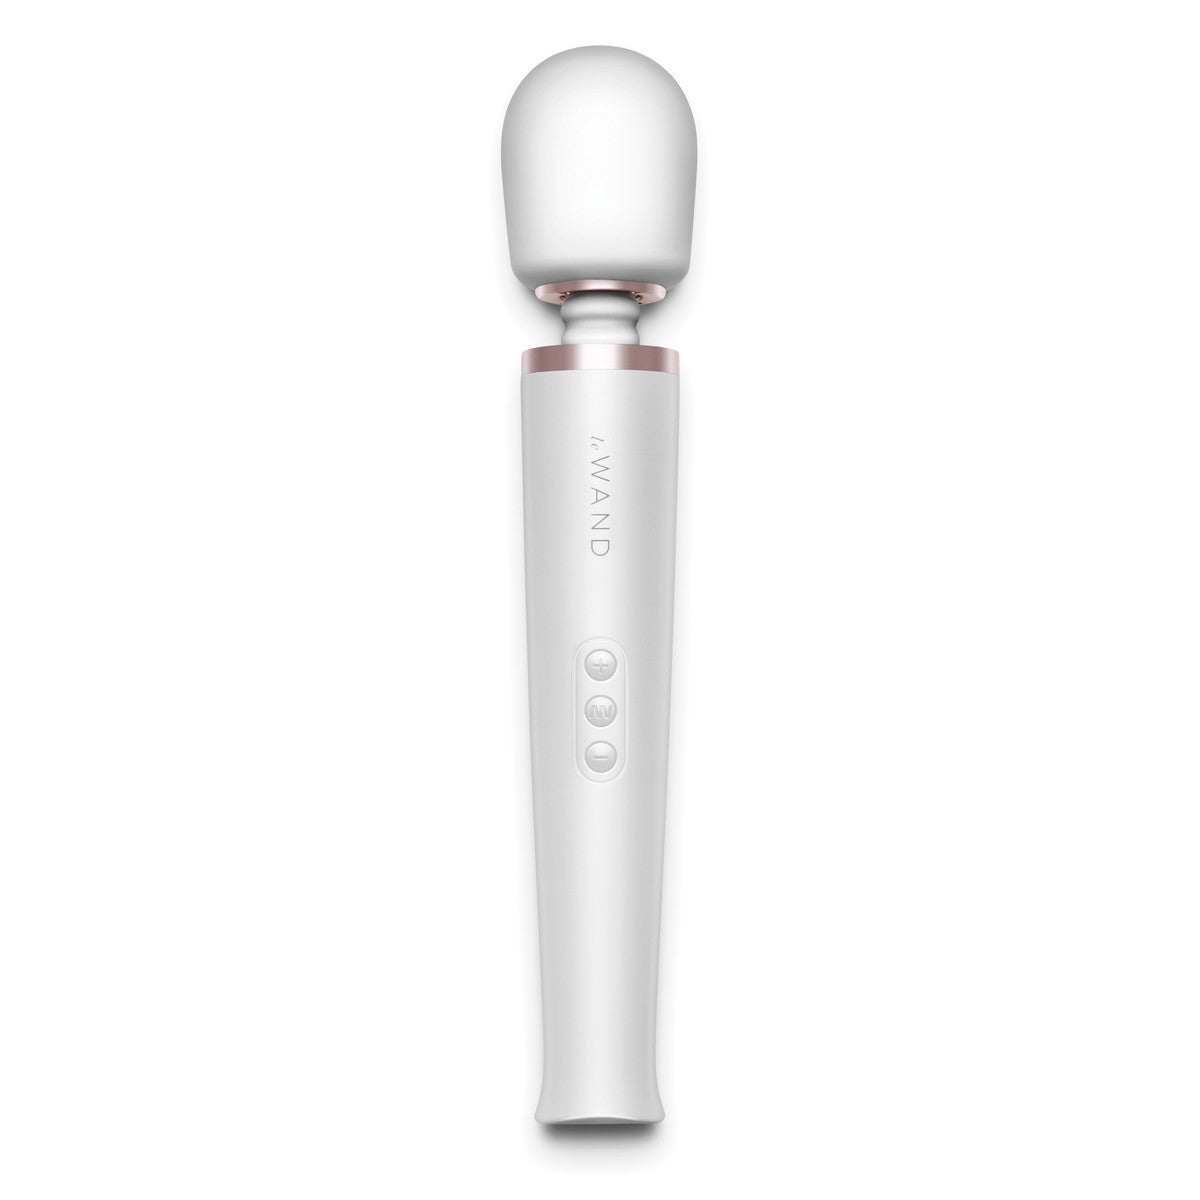 LE WAND PEARL RECHARGEABLE MASSAGER